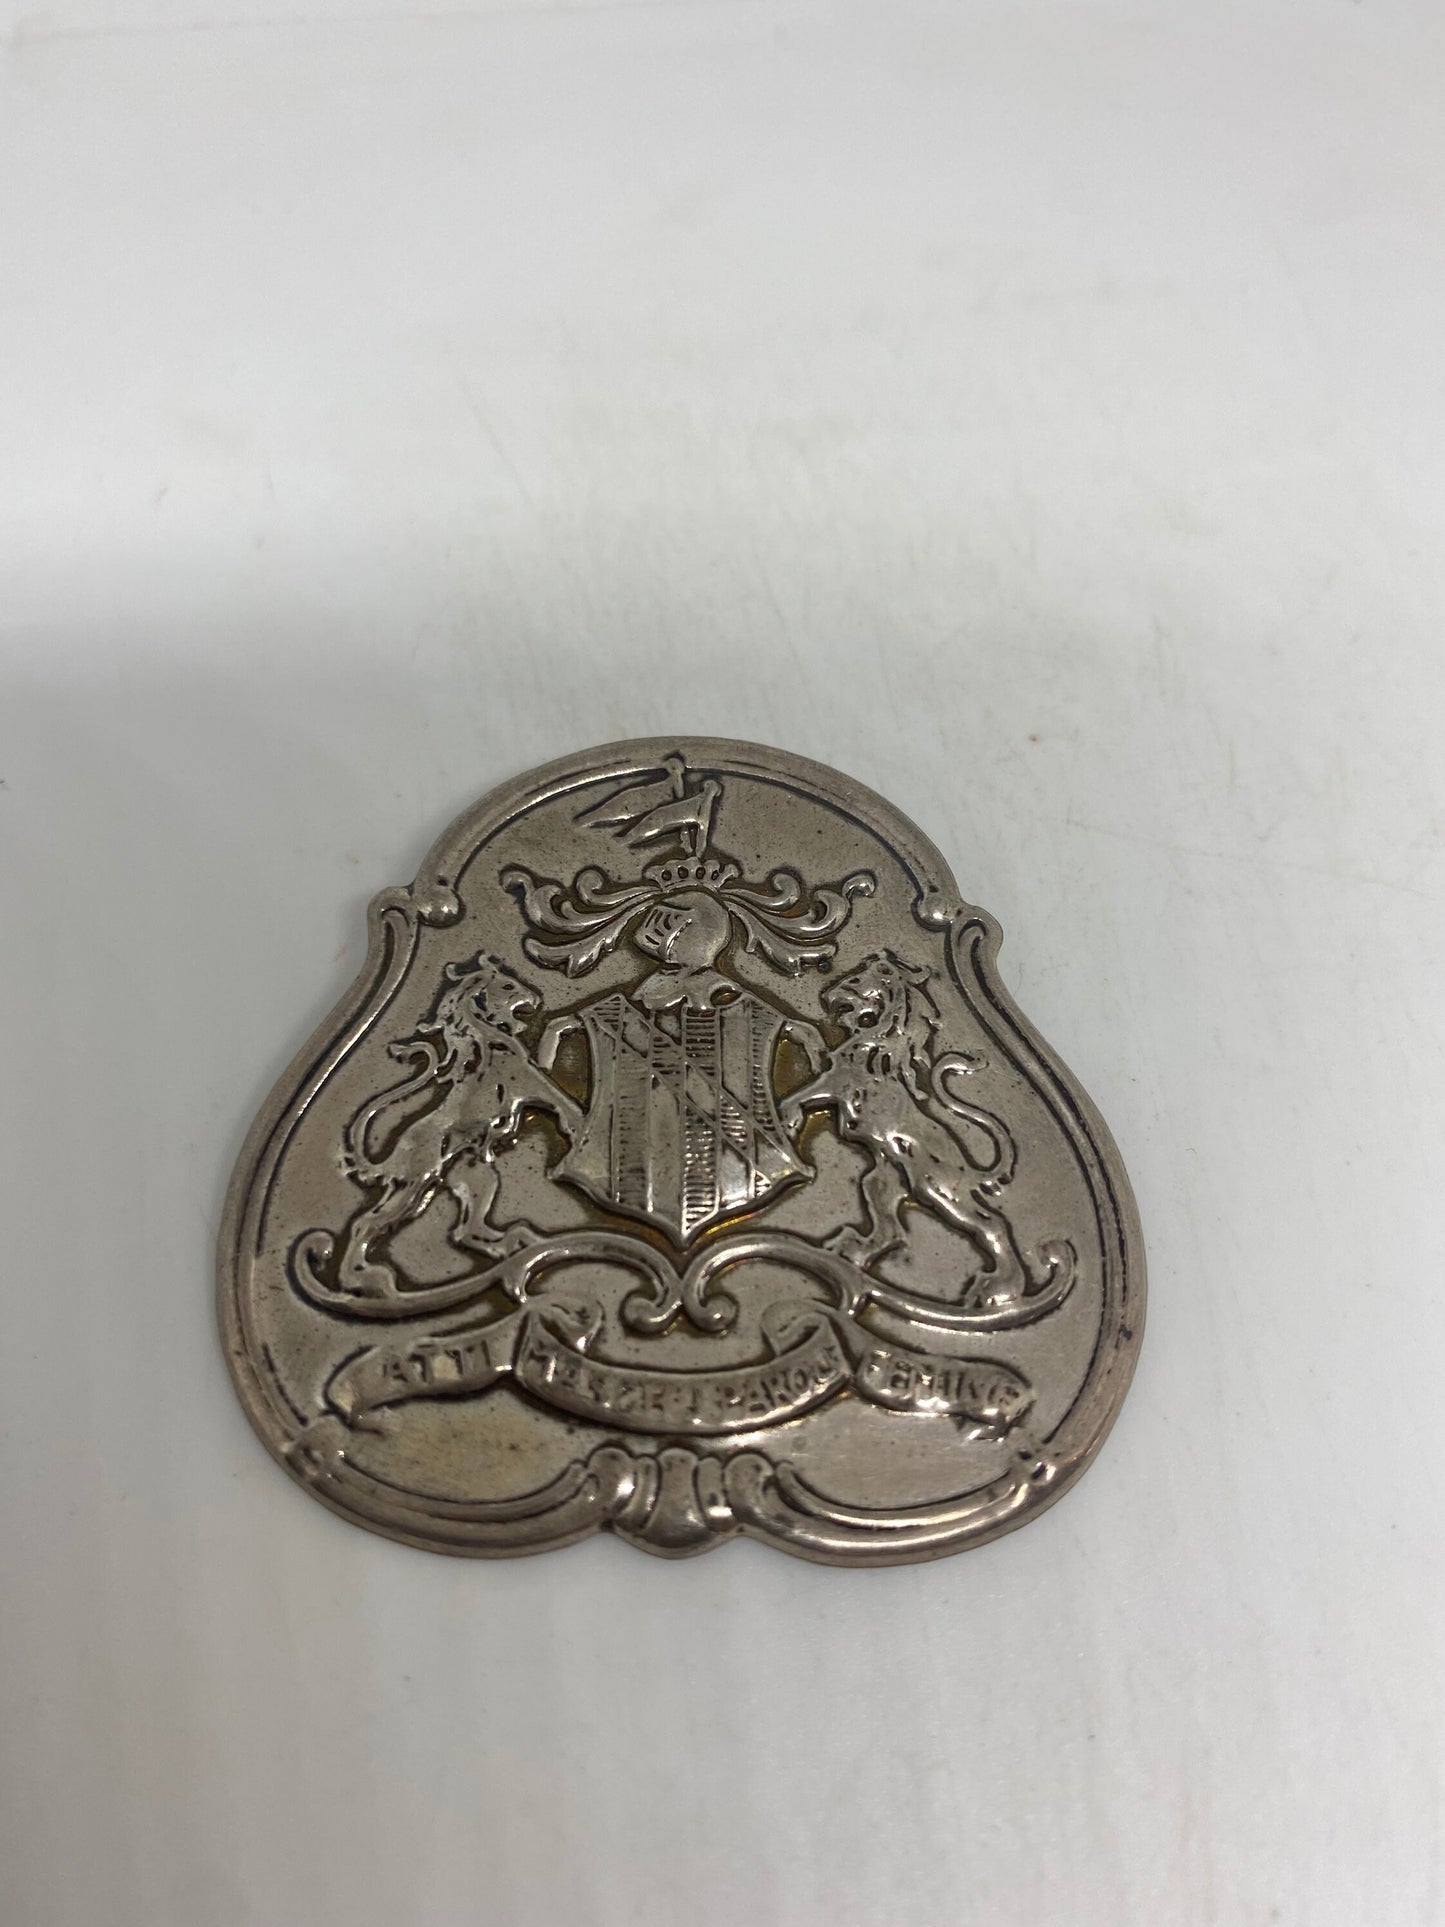 Vintage Crest Deco 925 Sterling Silver Small Brooch Pin